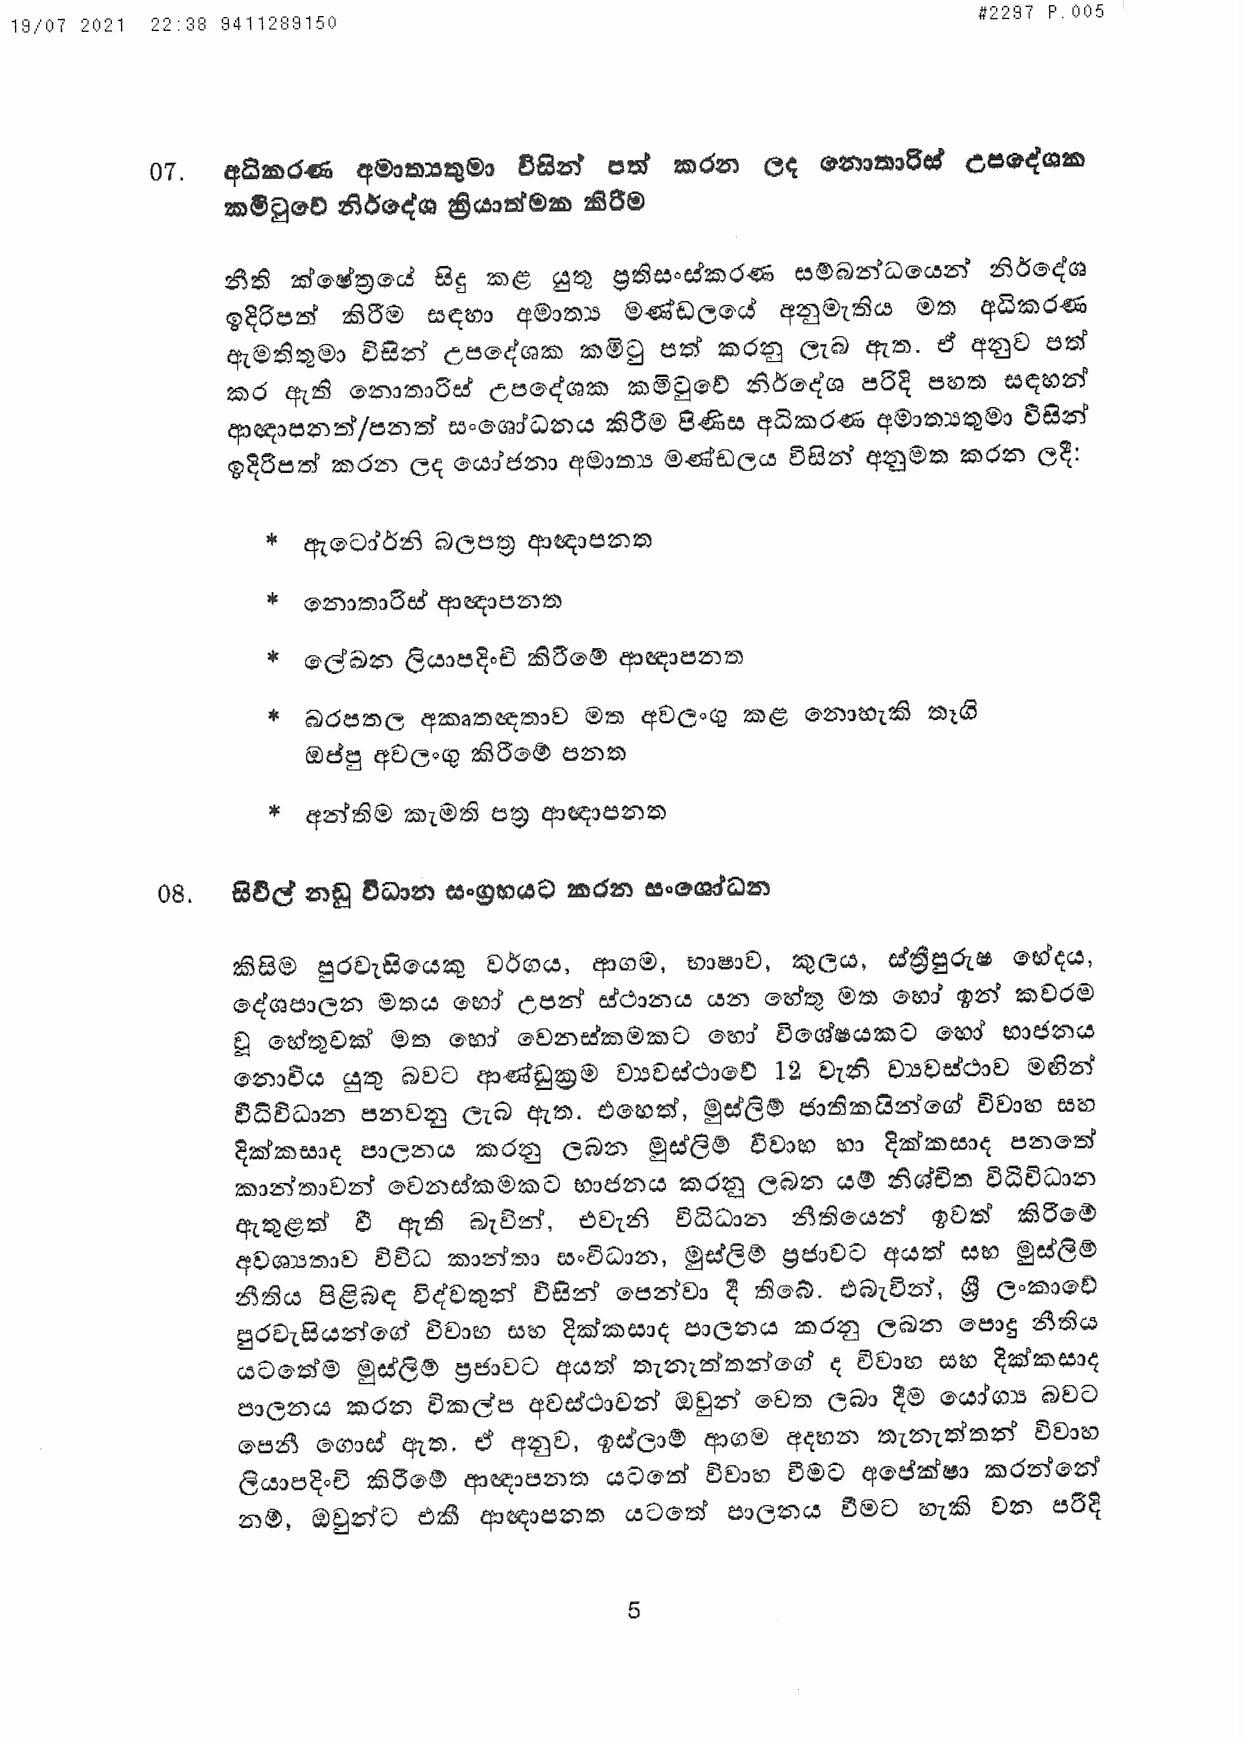 Cabinet Decision on 19.07.2021 page 005